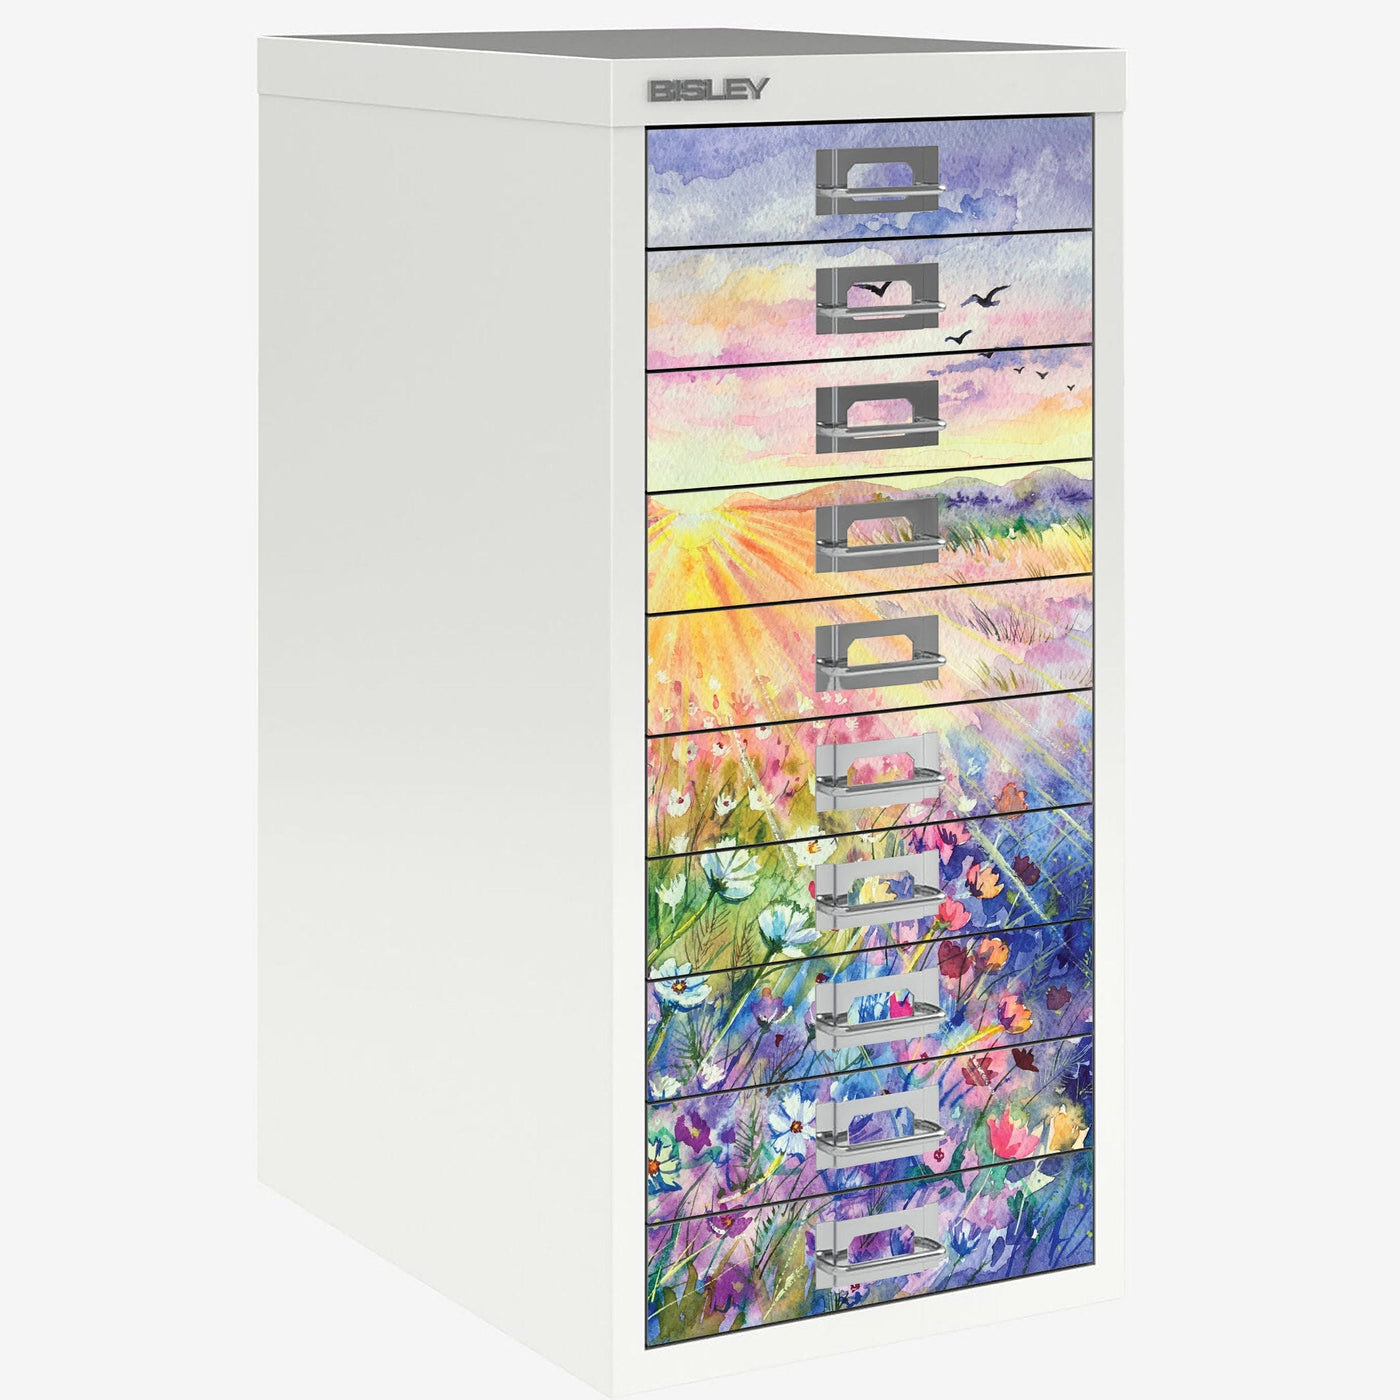 Sunrise Meadows decals for Bisley 10 drawer cabinet (not included)